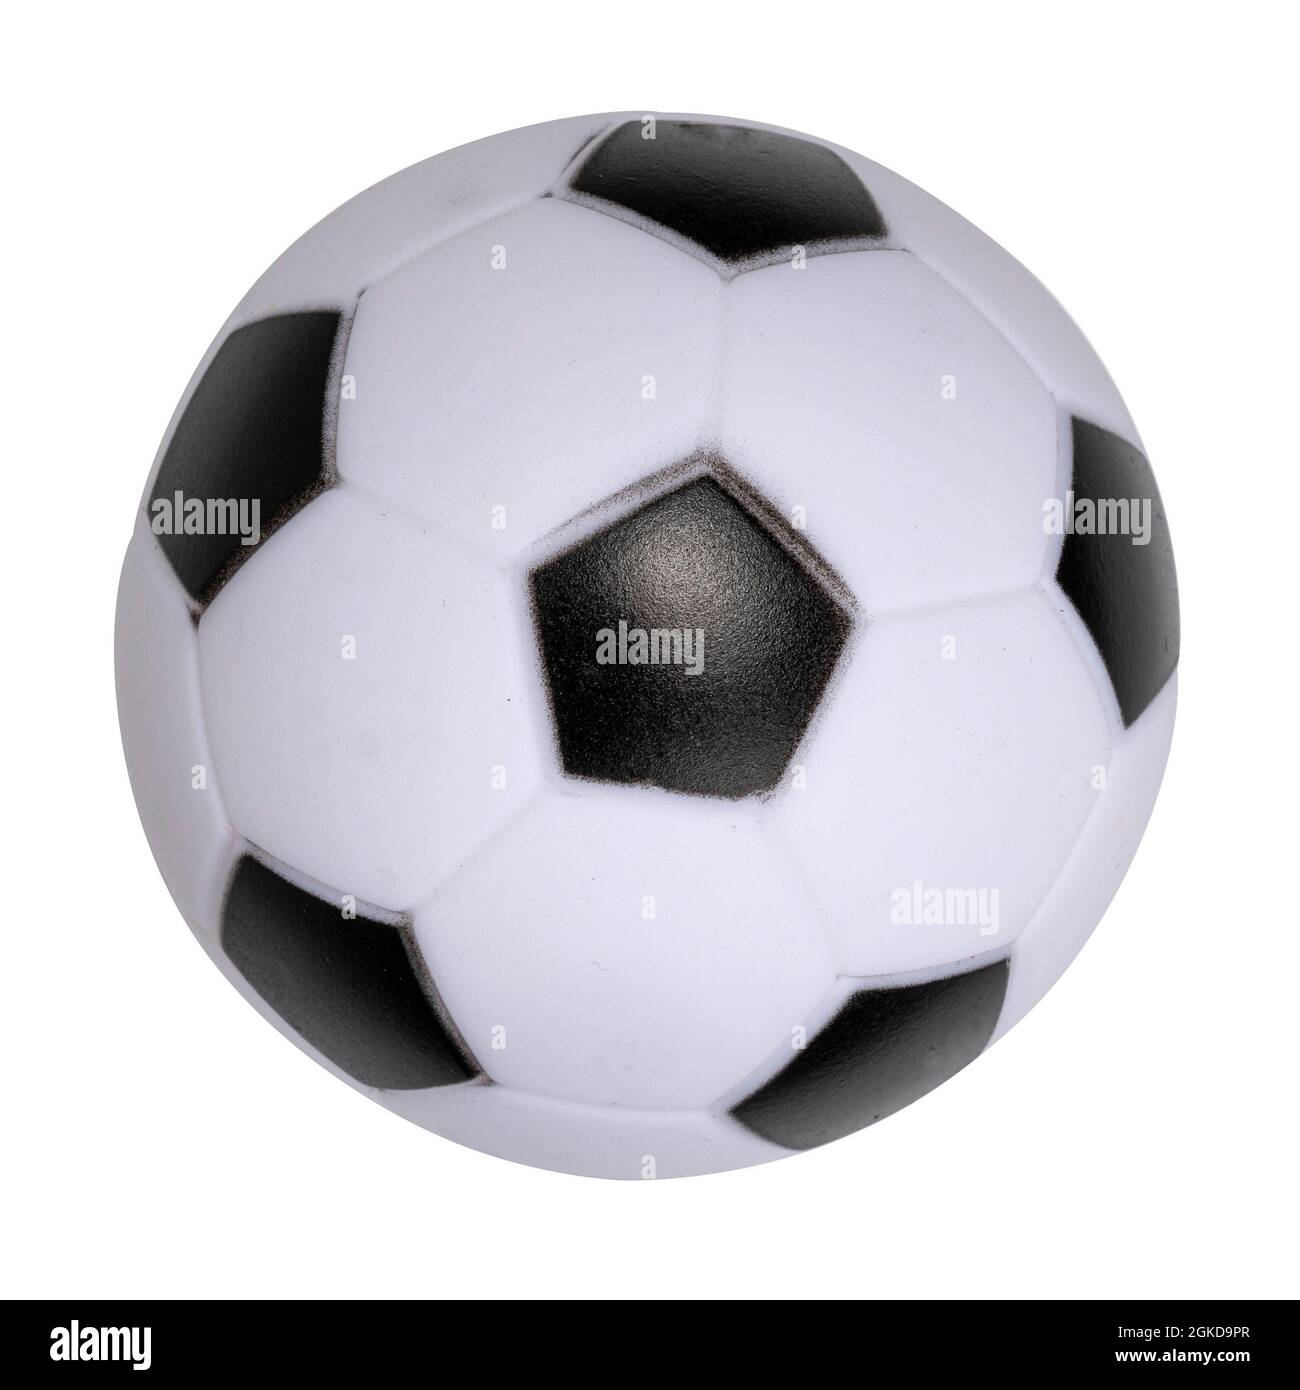 Top view of toy black and white football. Isolated on a white background. Stock Photo